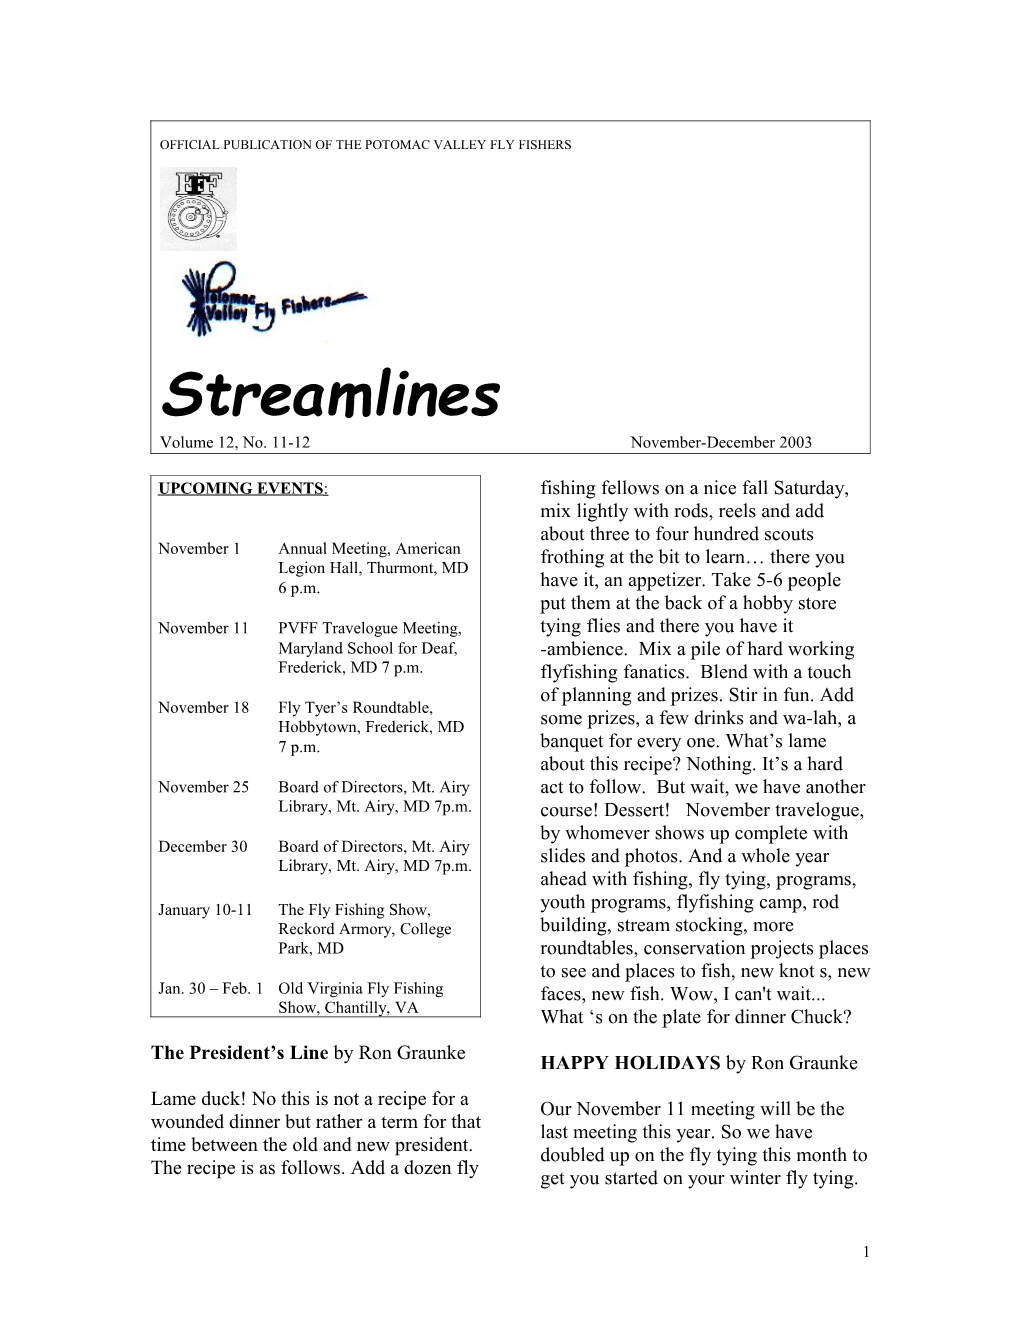 Official Publication of the Potomac Valley Fly Fishermen